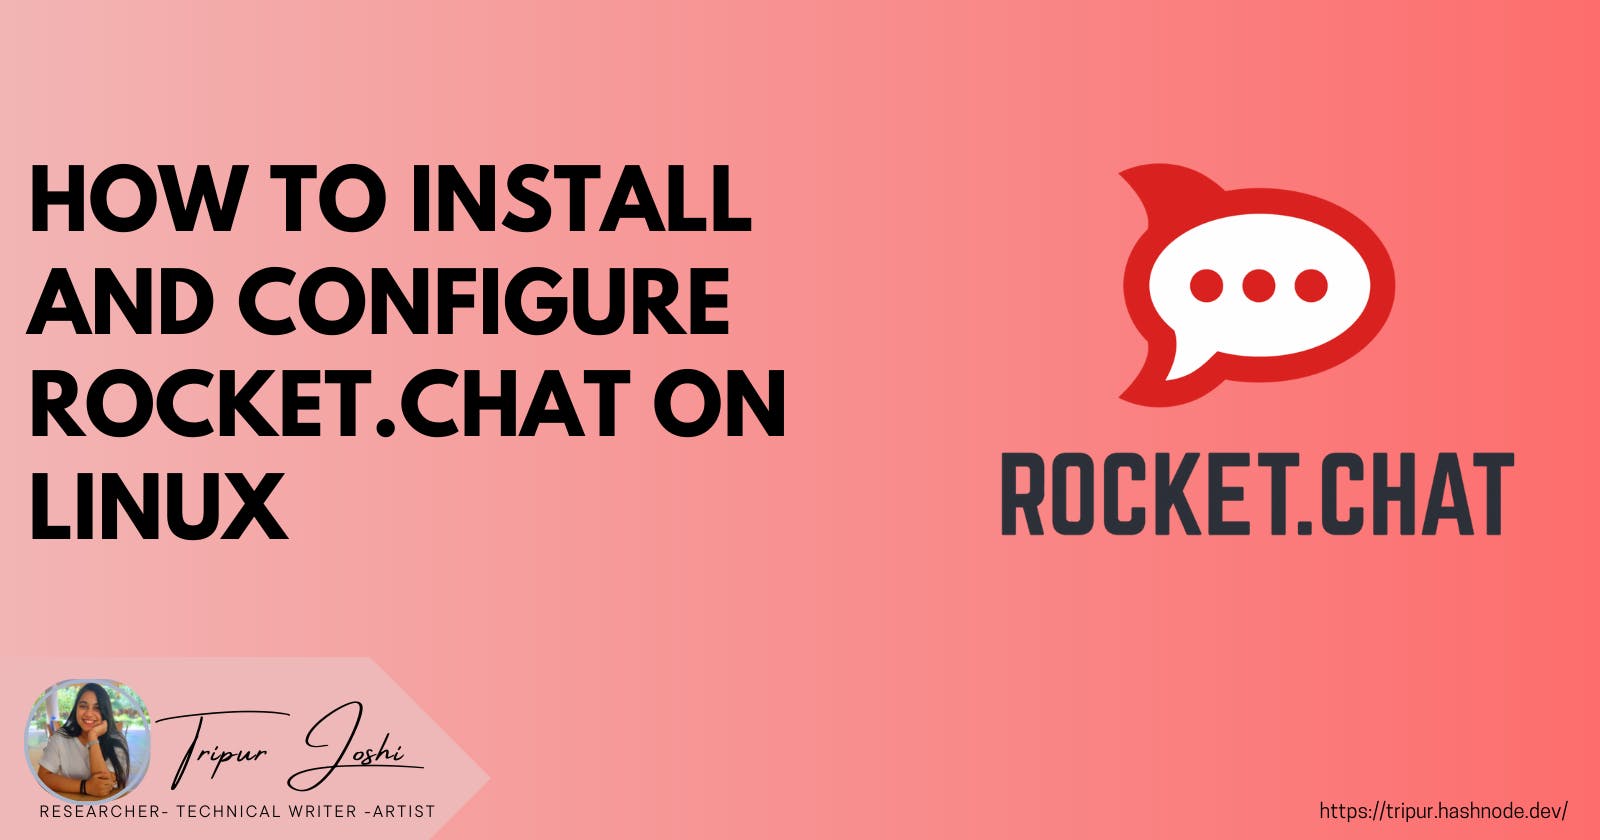 How to Install and Configure Rocket.Chat on Linux